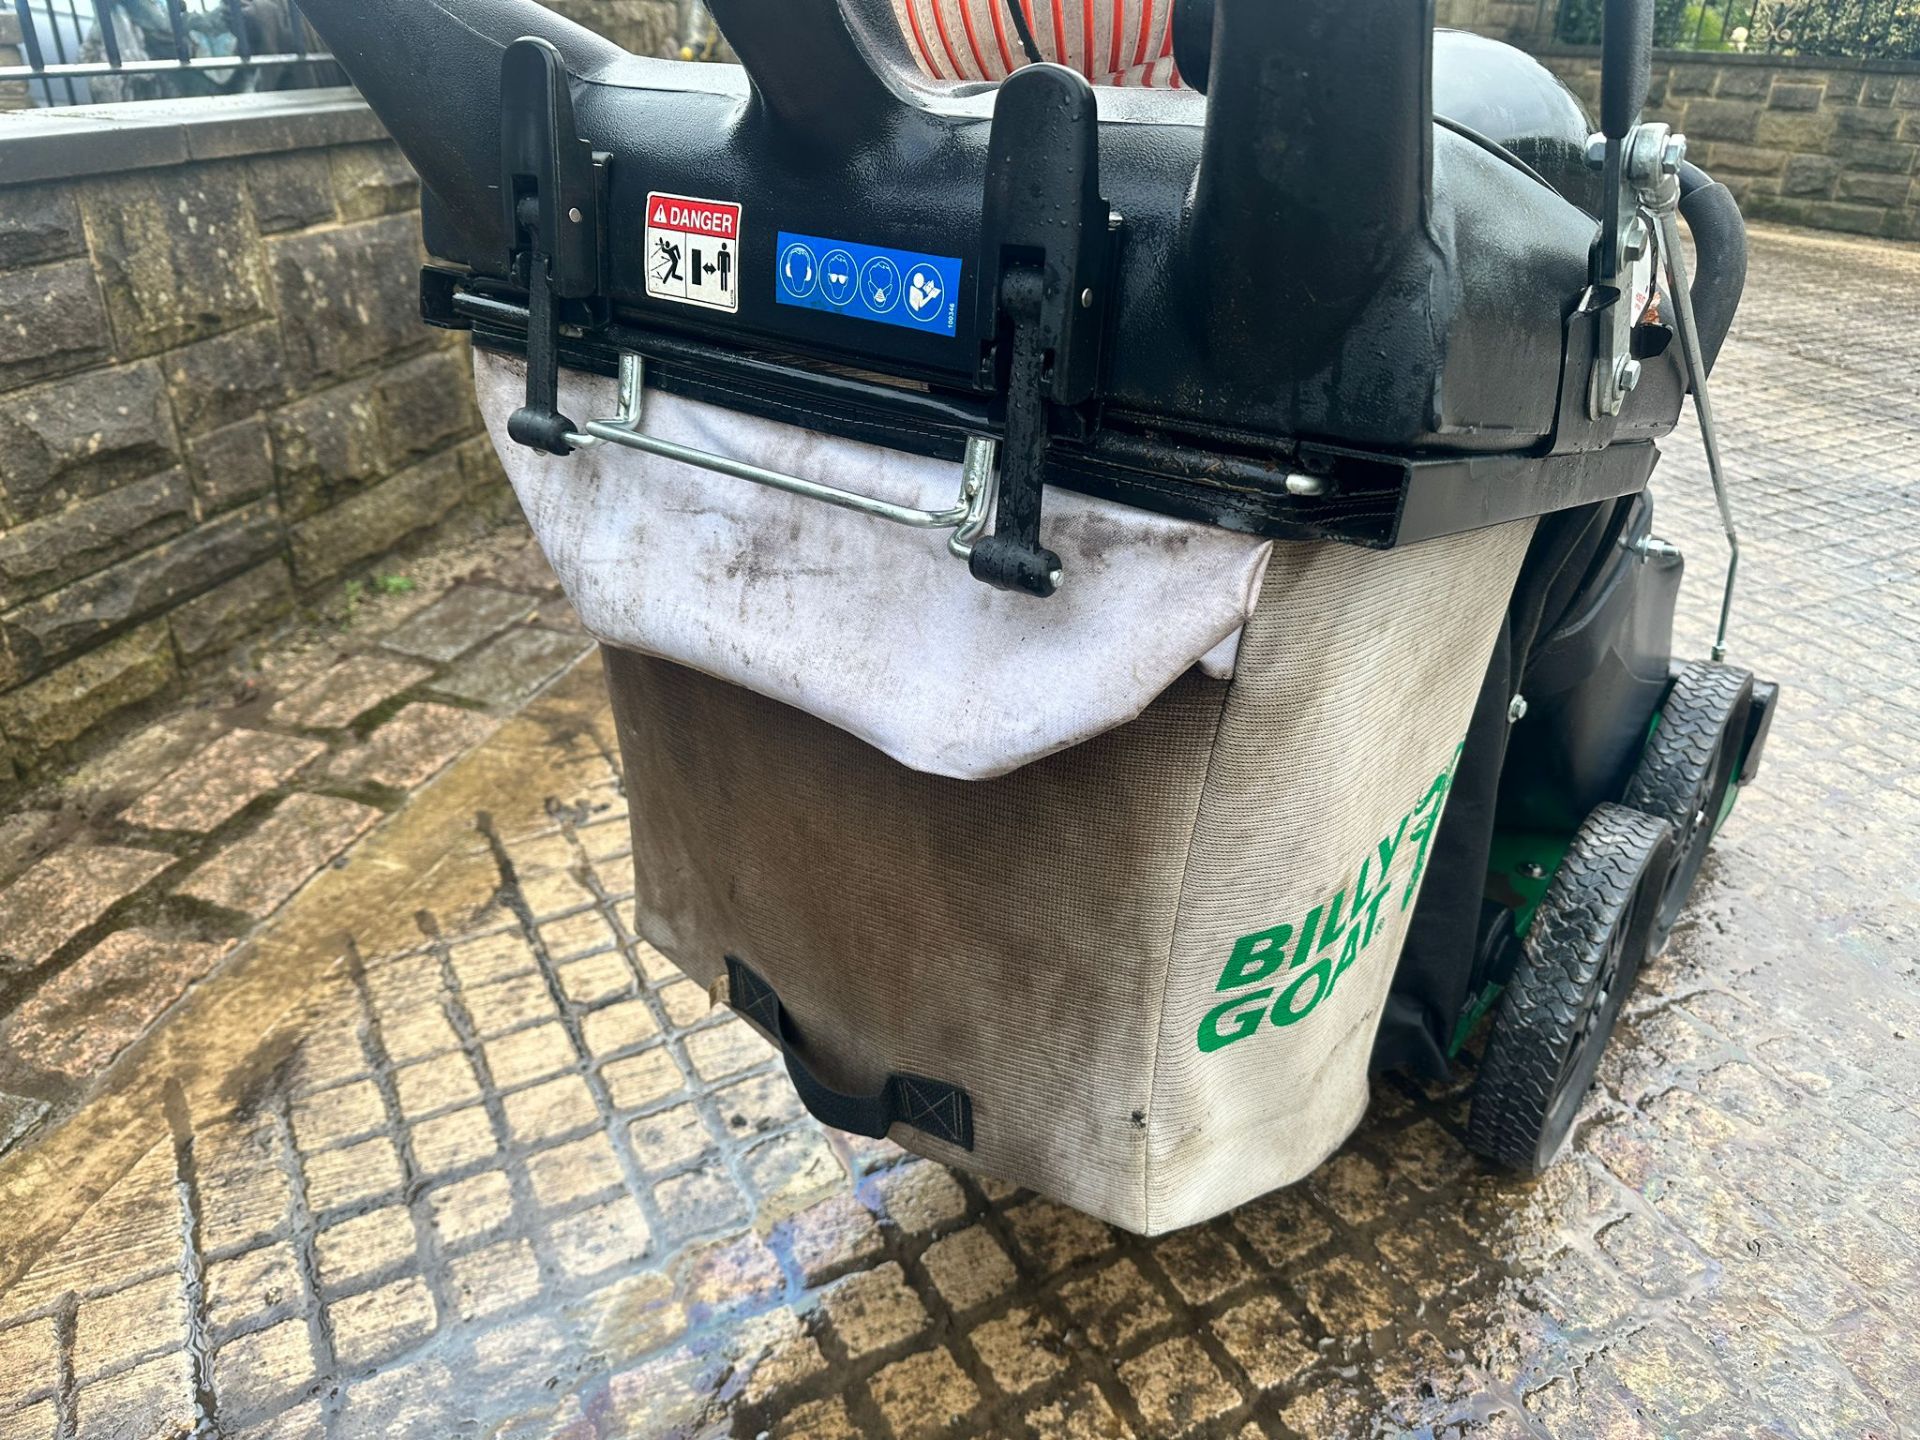 2019 BILLY GOAT MV650SPH 29” SELF PROPELLED GARDEN VACCUM COLLECTOR WITH WANDER WAND *PLUS VAT* - Image 3 of 11